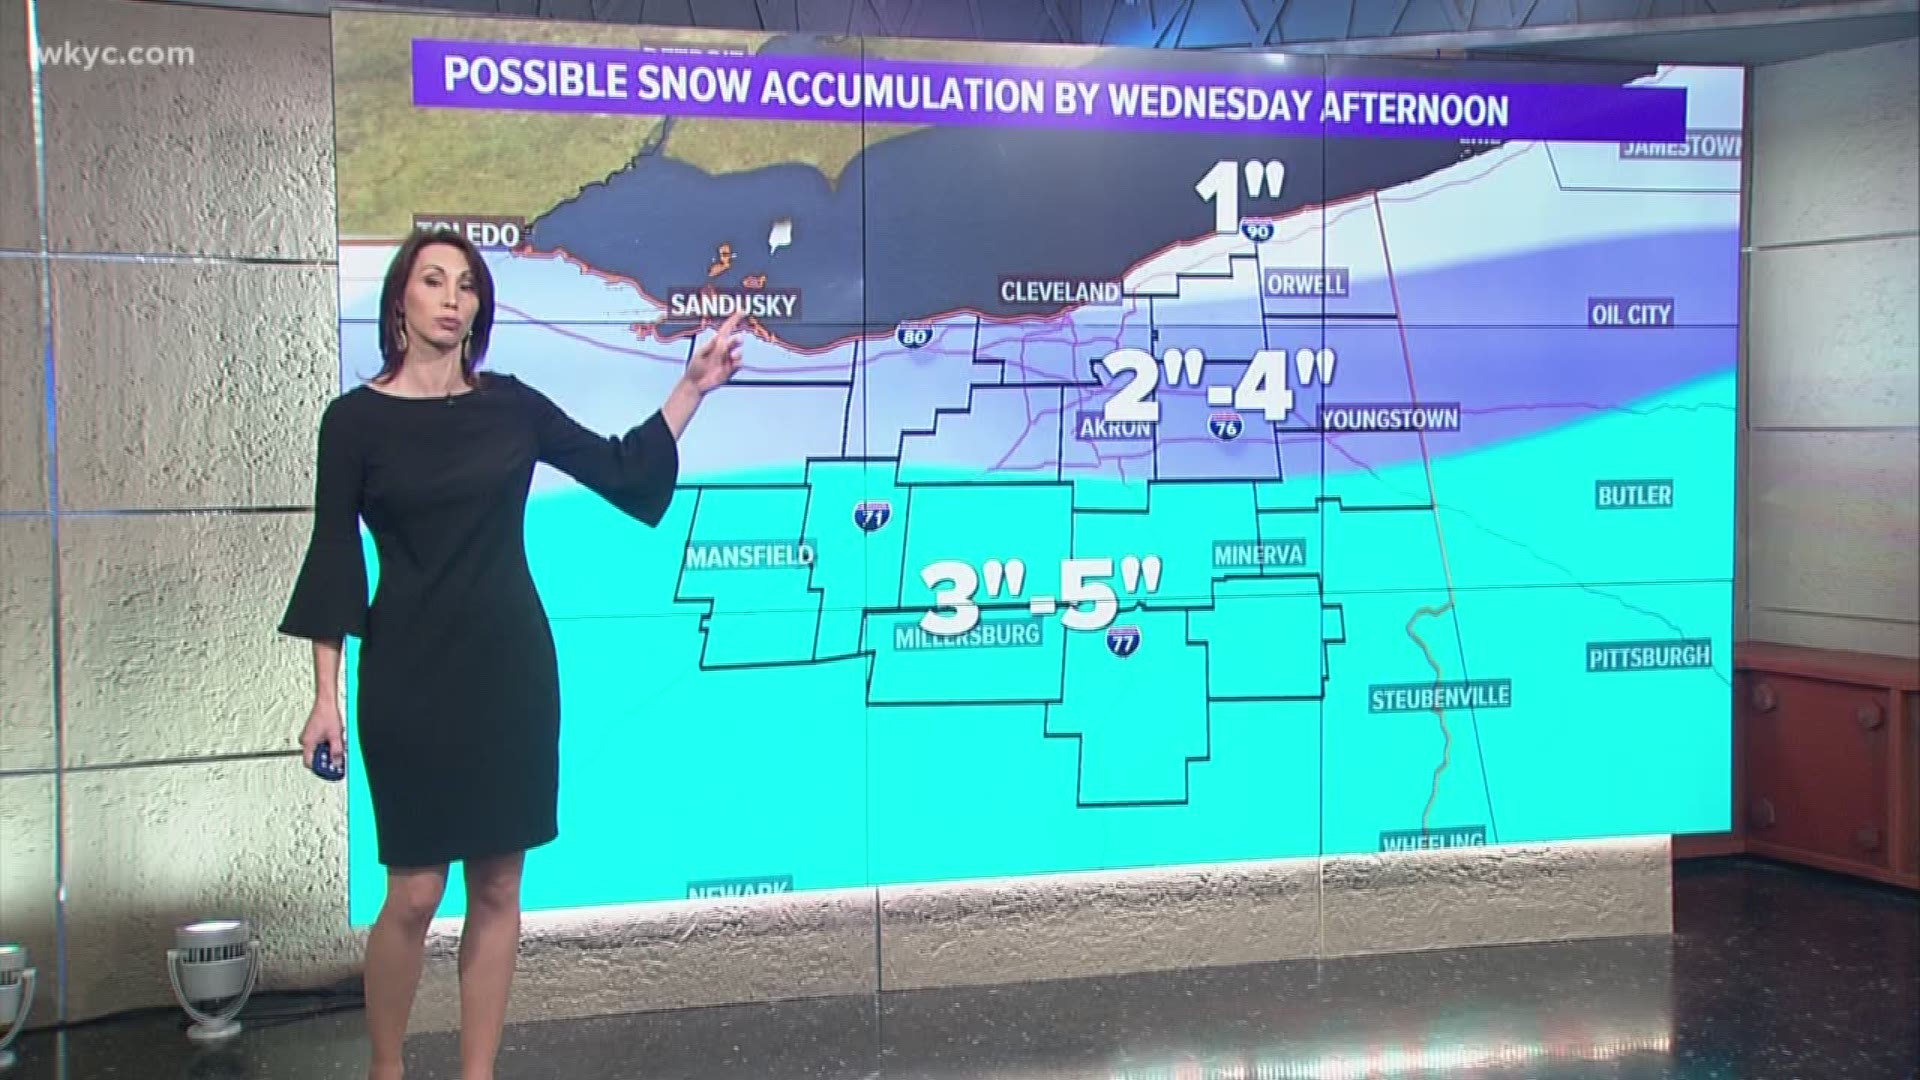 Winter storm could bring several inches of snow, mainly south of Cleveland